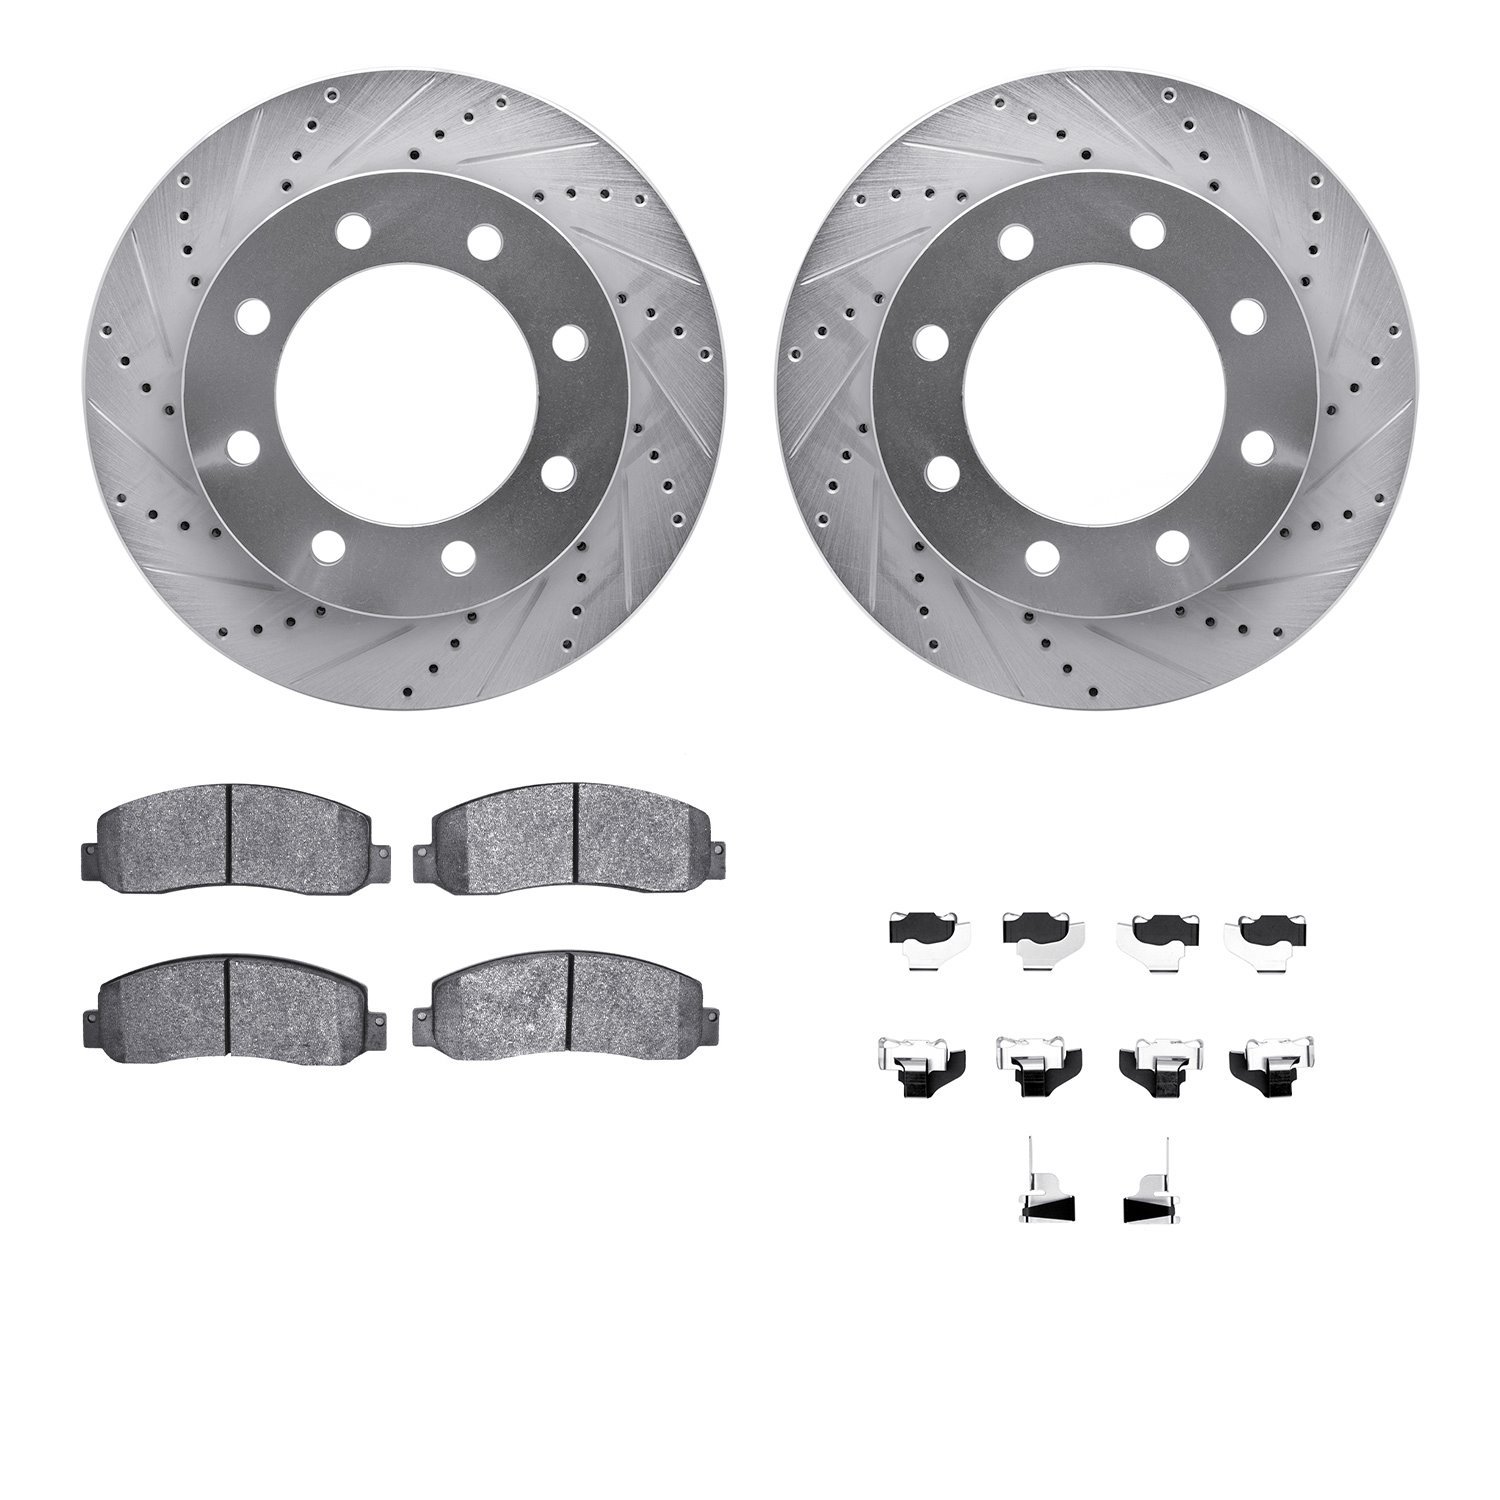 7412-54079 Drilled/Slotted Brake Rotors with Ultimate-Duty Brake Pads Kit & Hardware [Silver], 2005-2012 Ford/Lincoln/Mercury/Ma